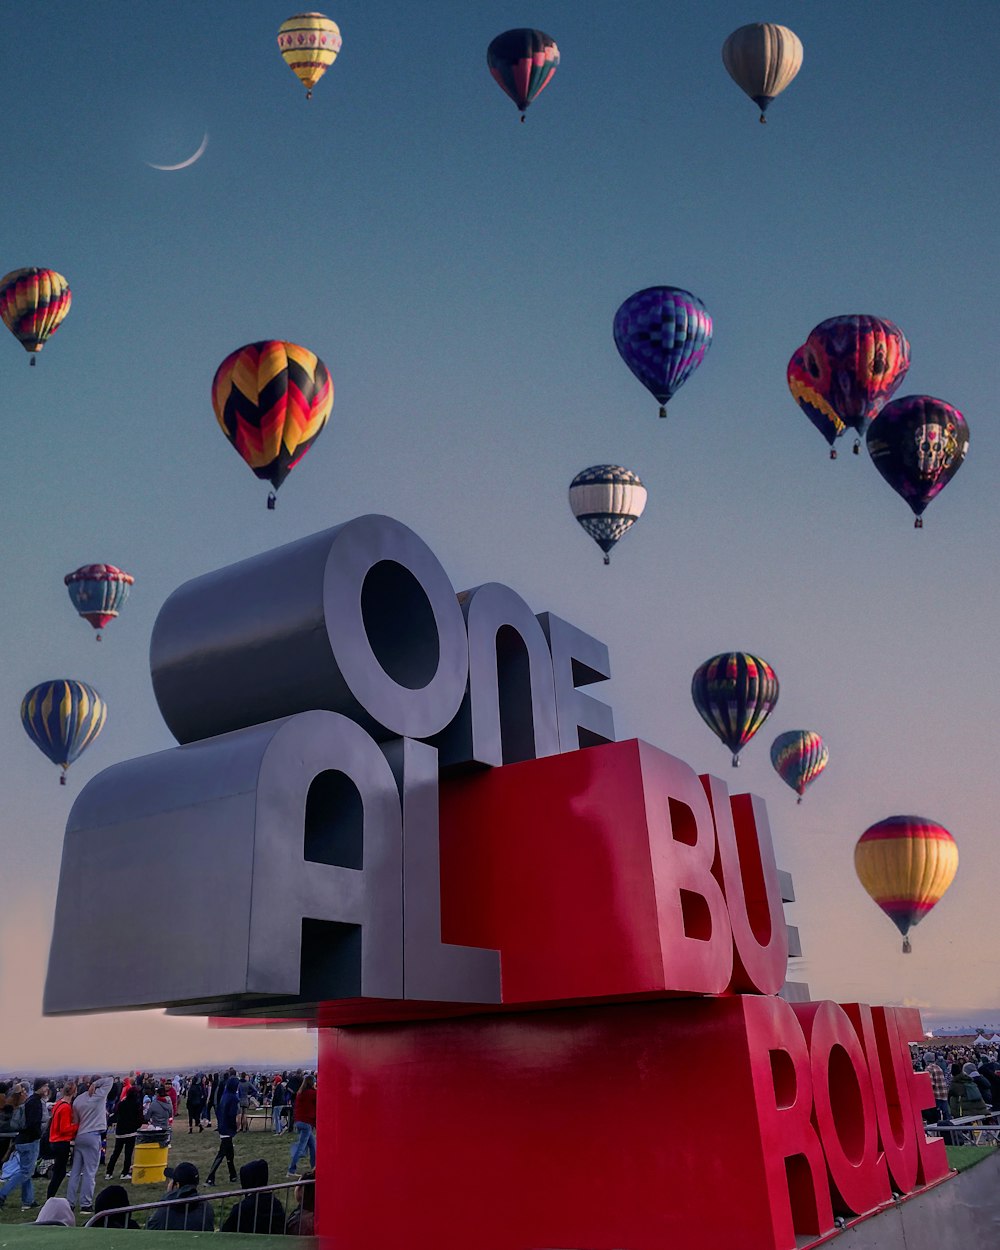 a group of hot air balloons flying over a sign